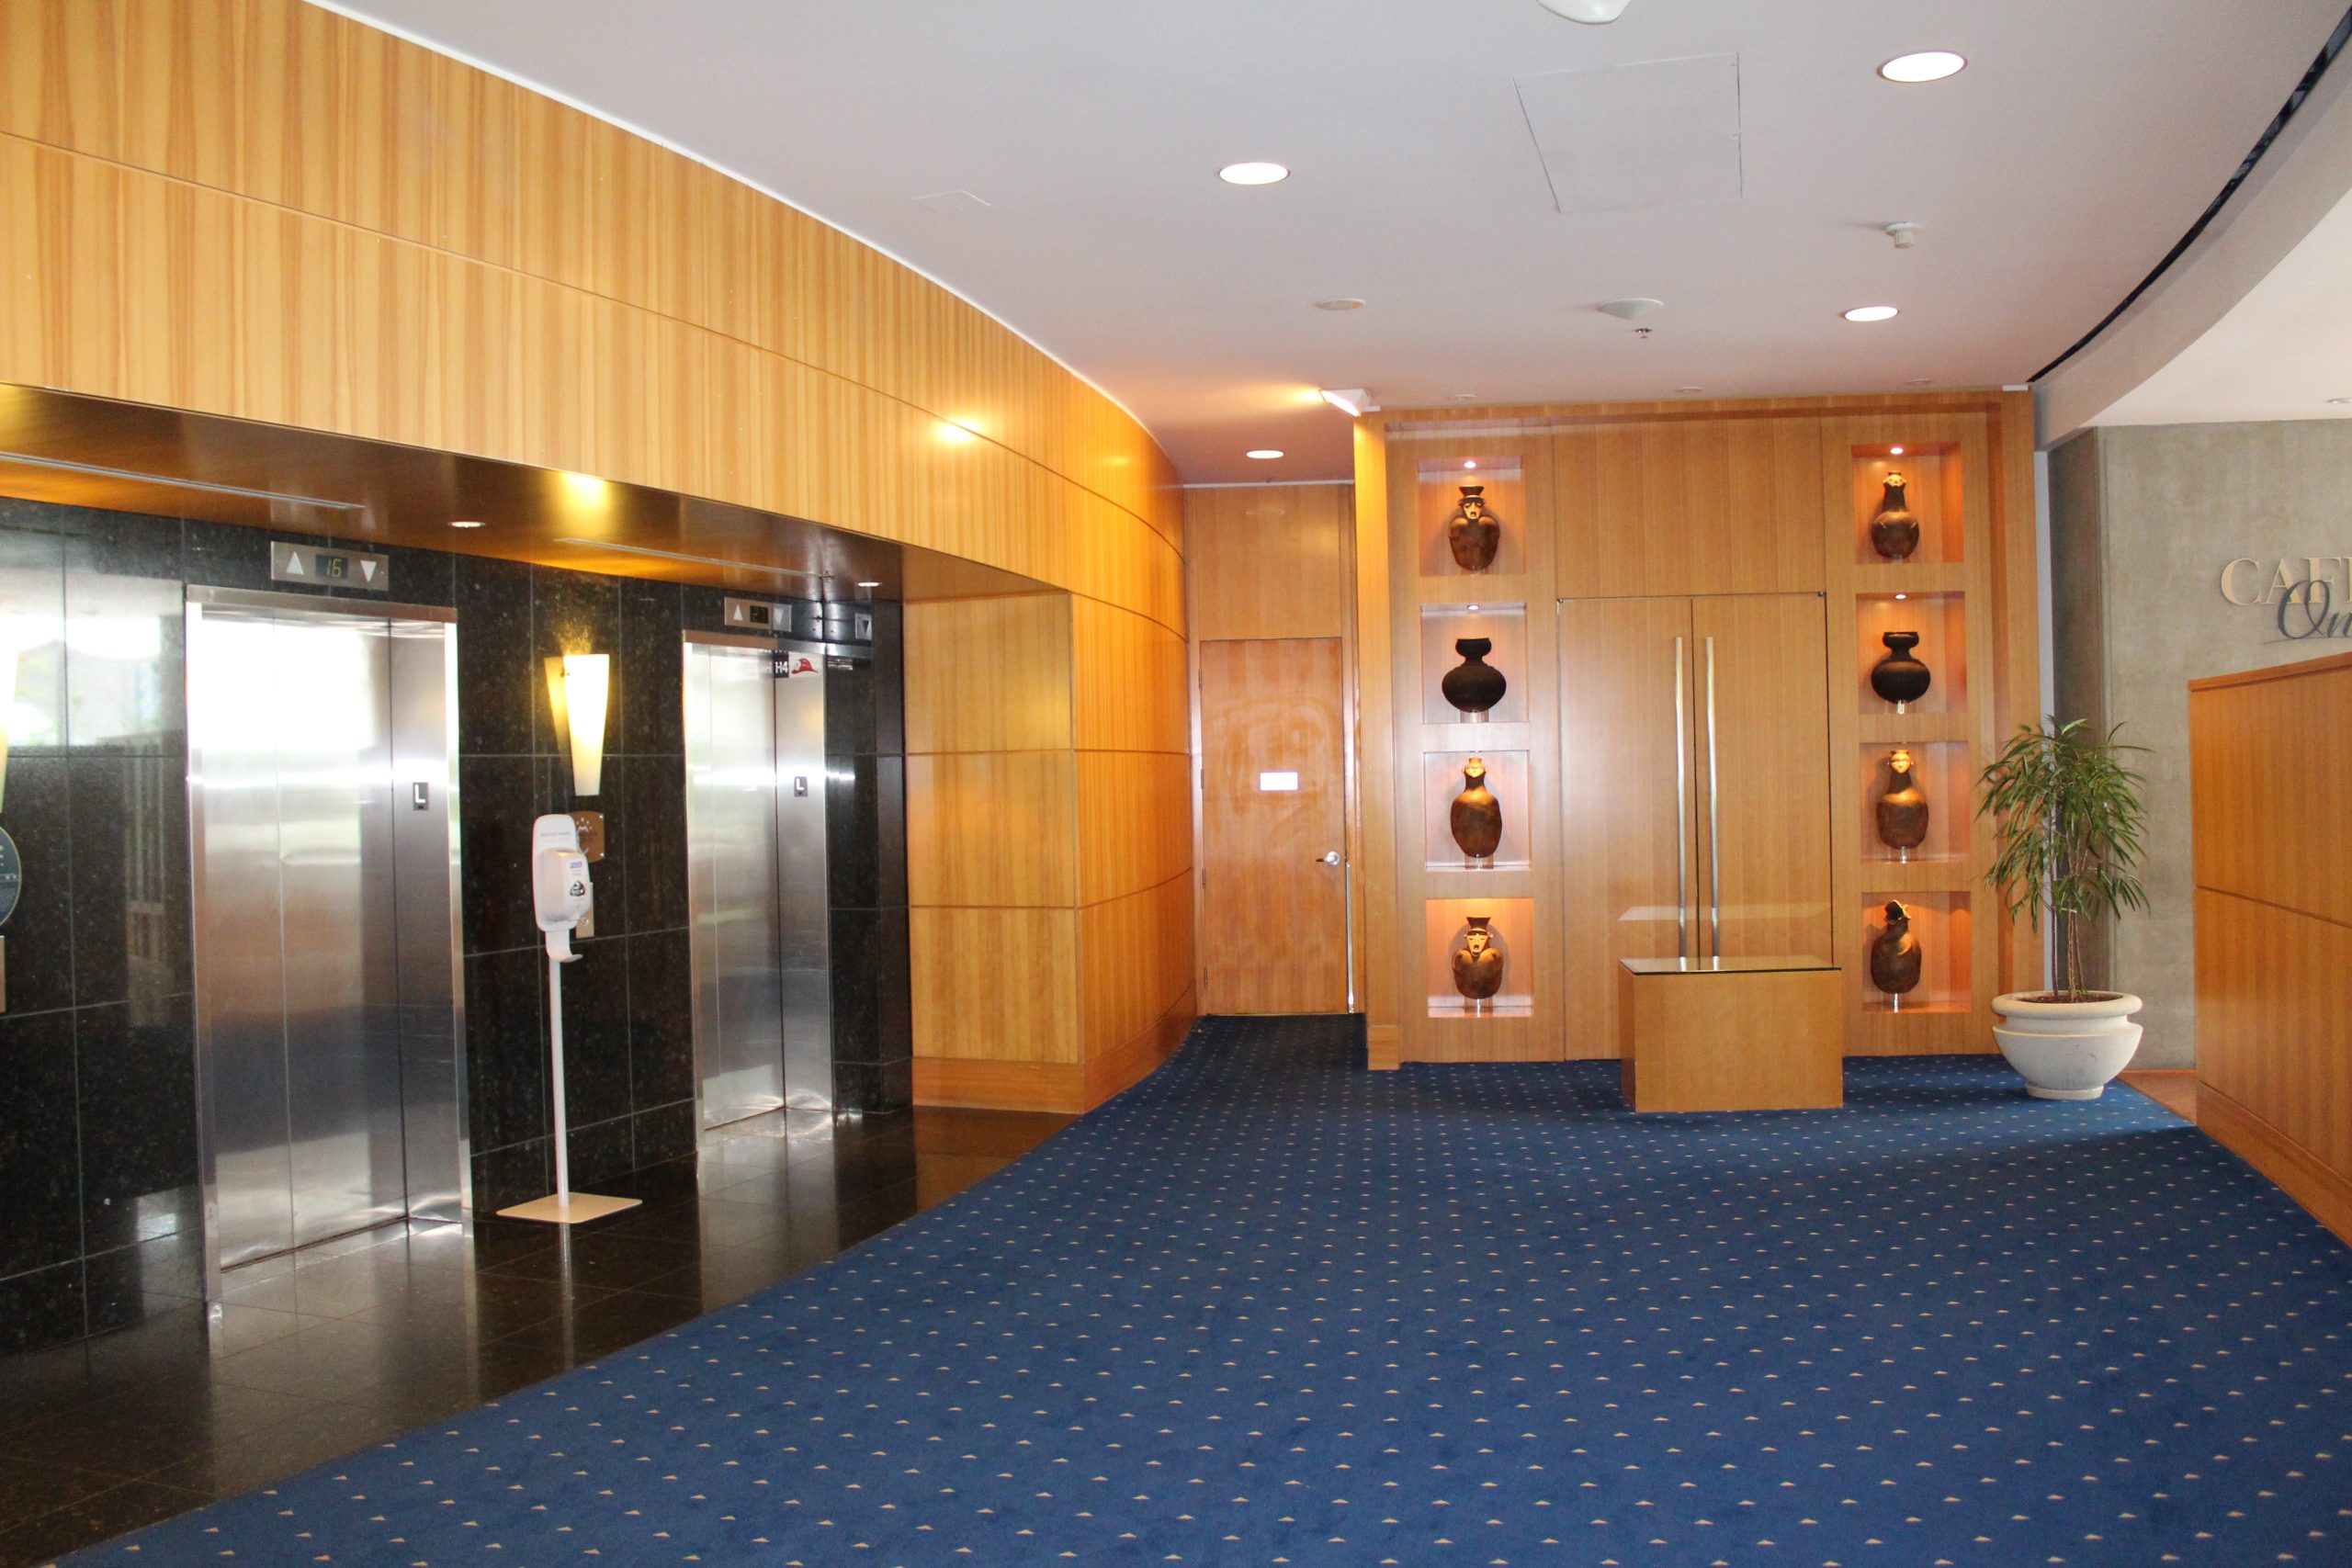 Reception elevators with walls made of pacific HemFir desk and walls